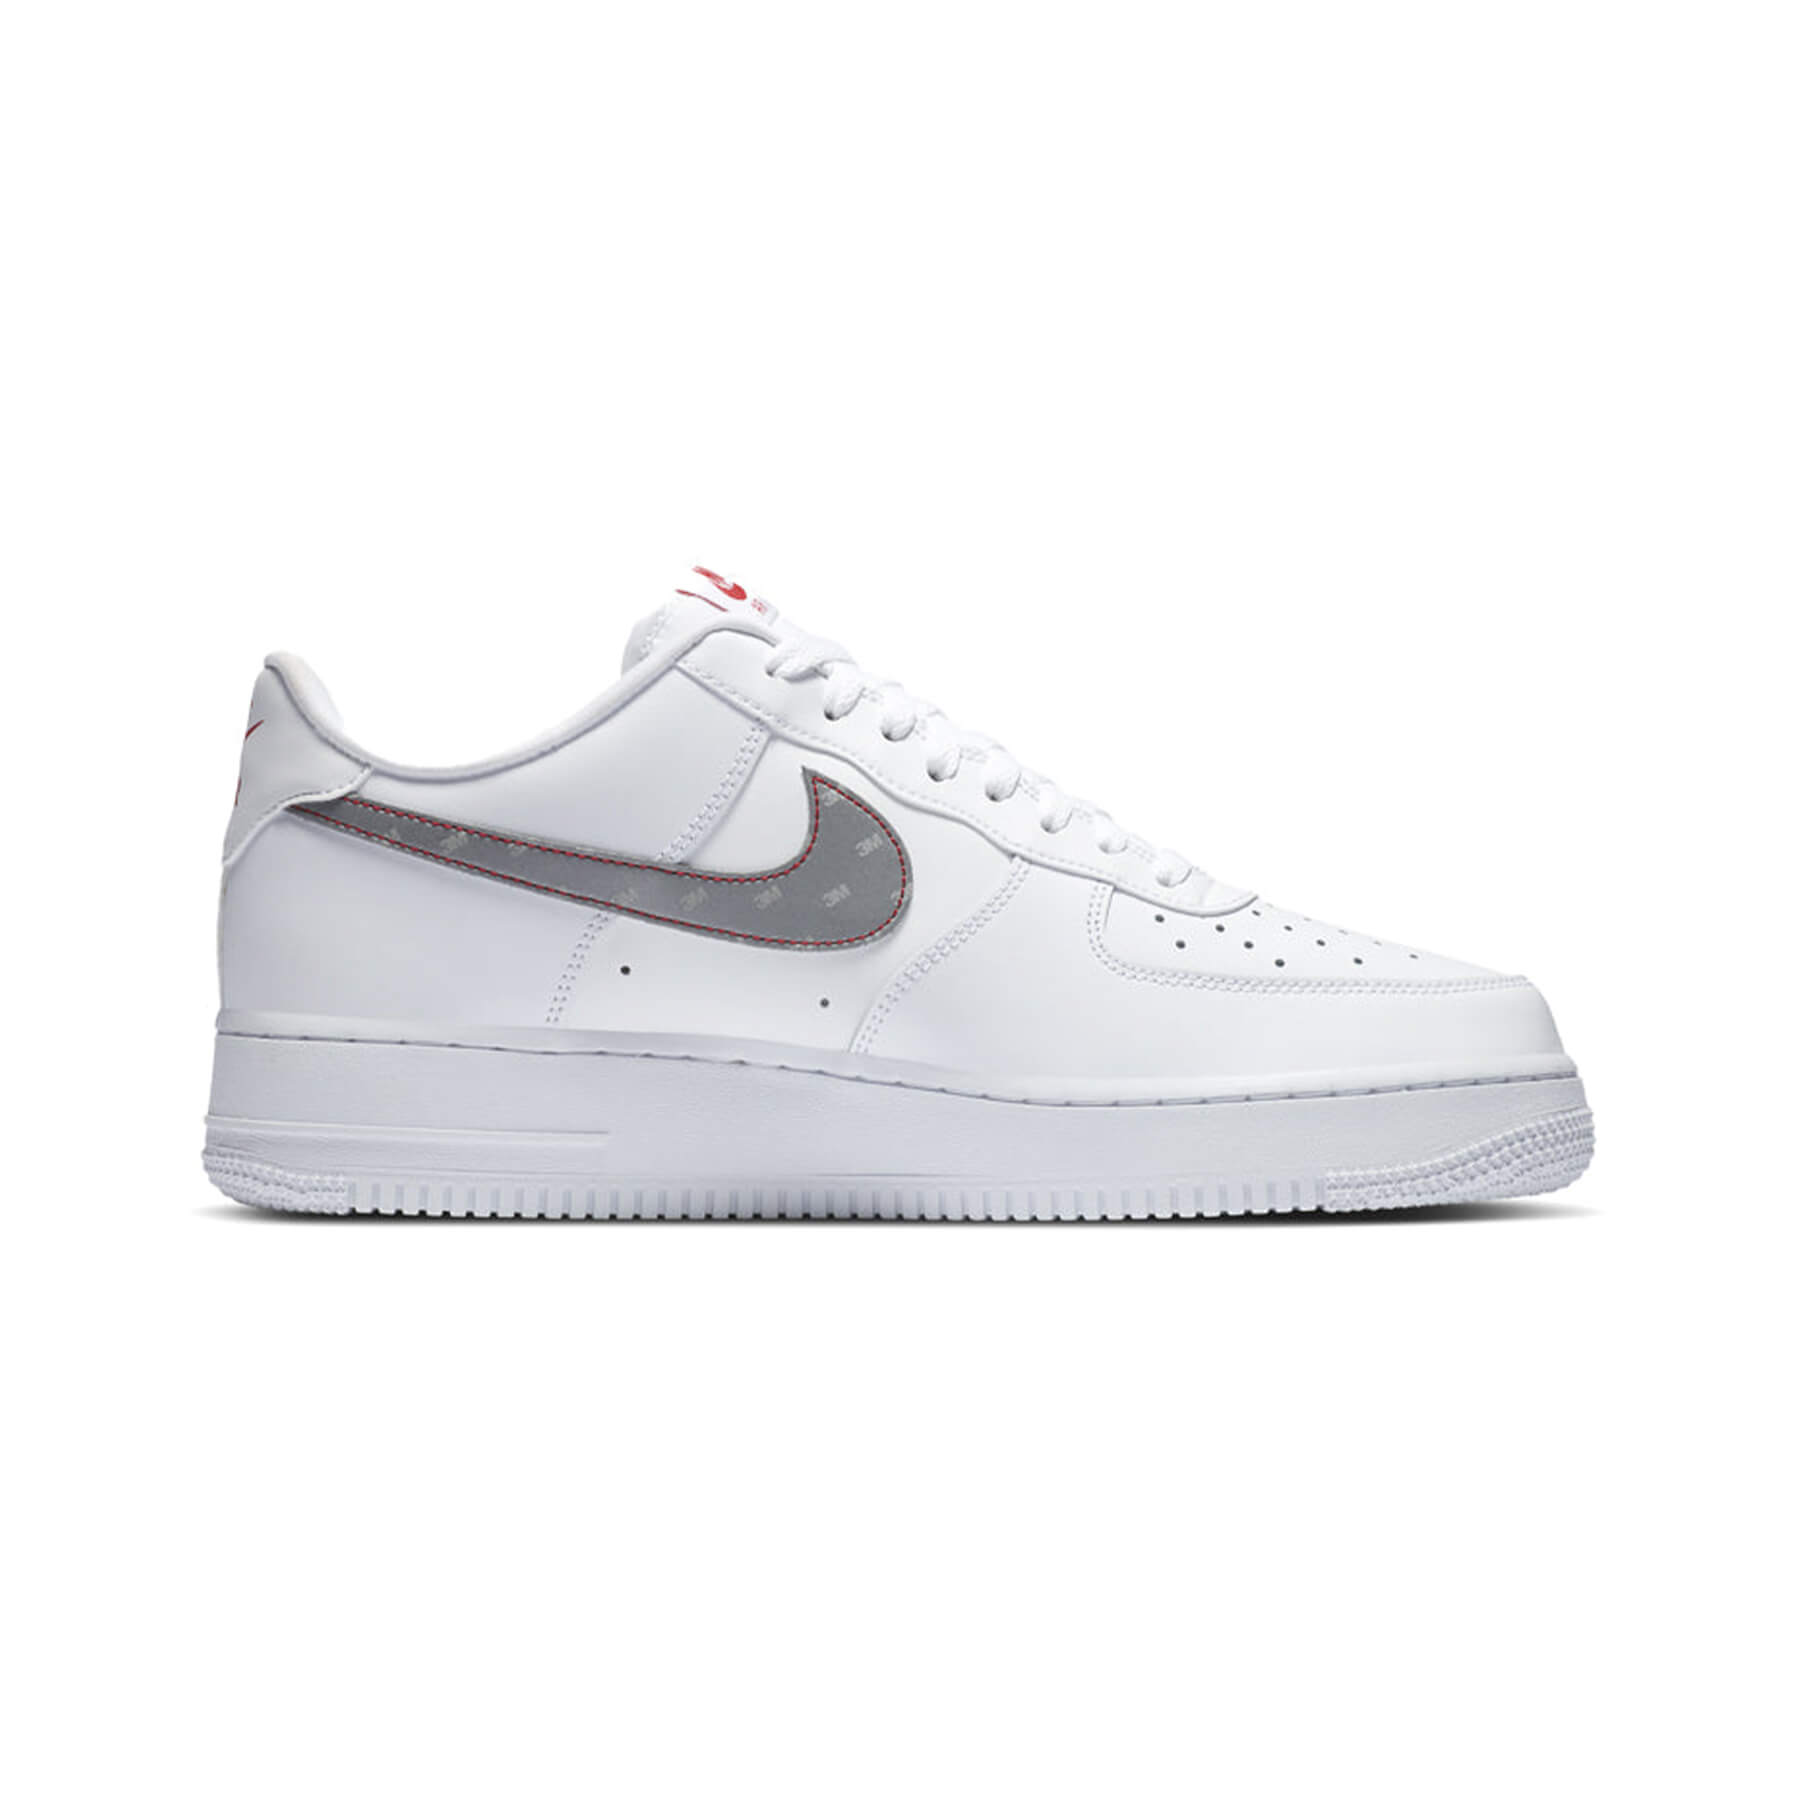 Nike Air Force 1 Low 3M Swoosh White - Fast Delivery